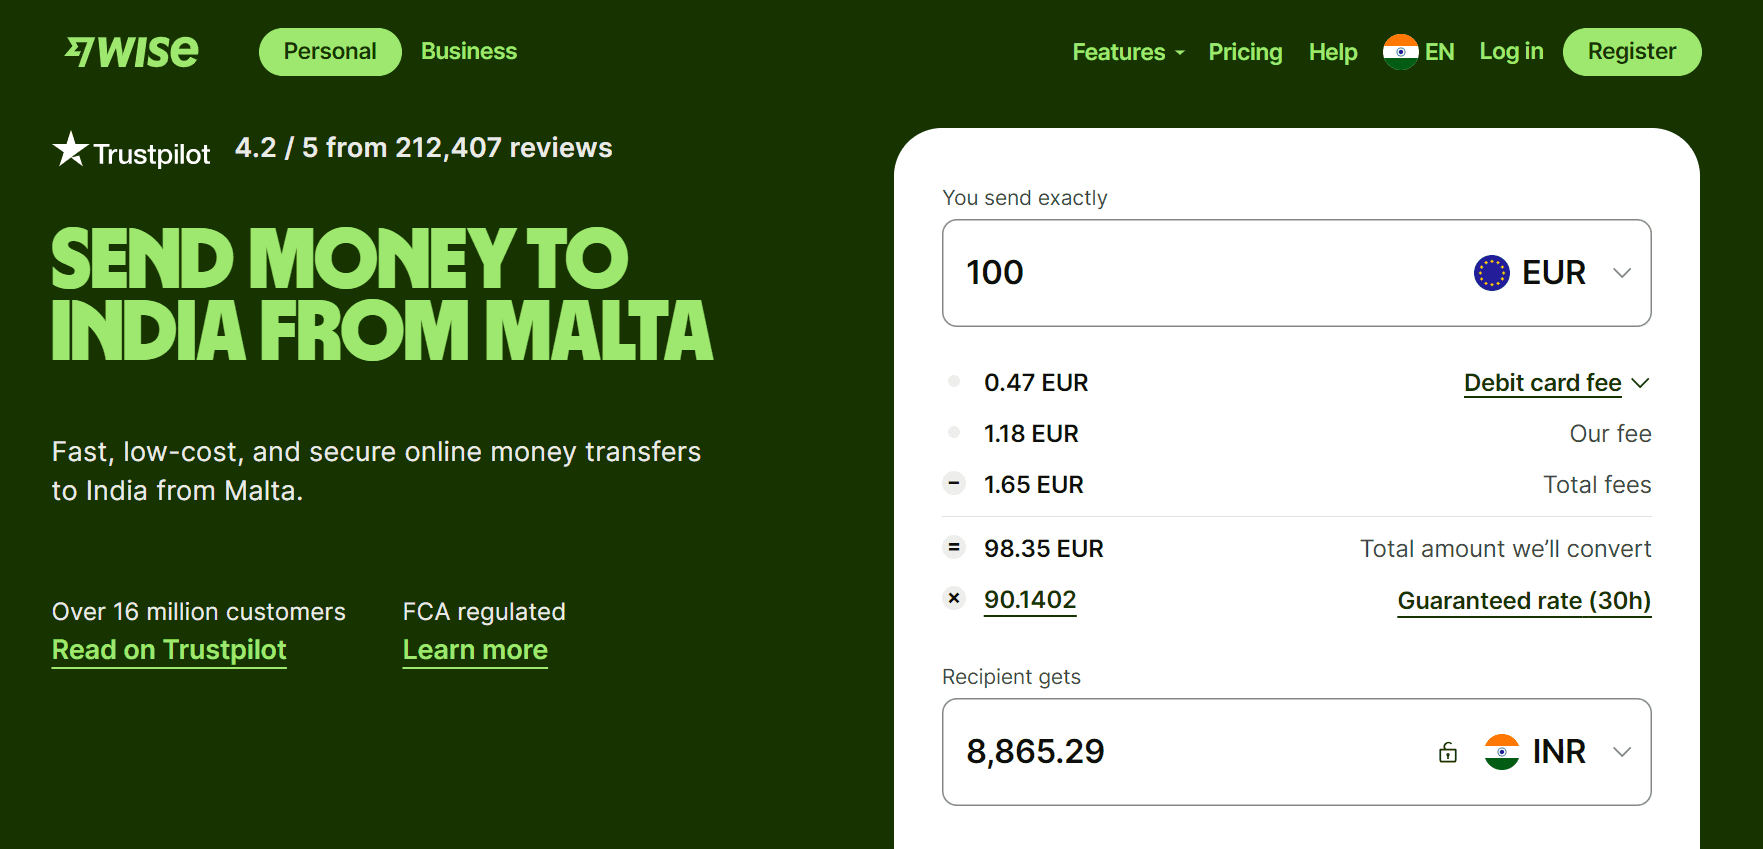 Send money from Malta to India like a pro